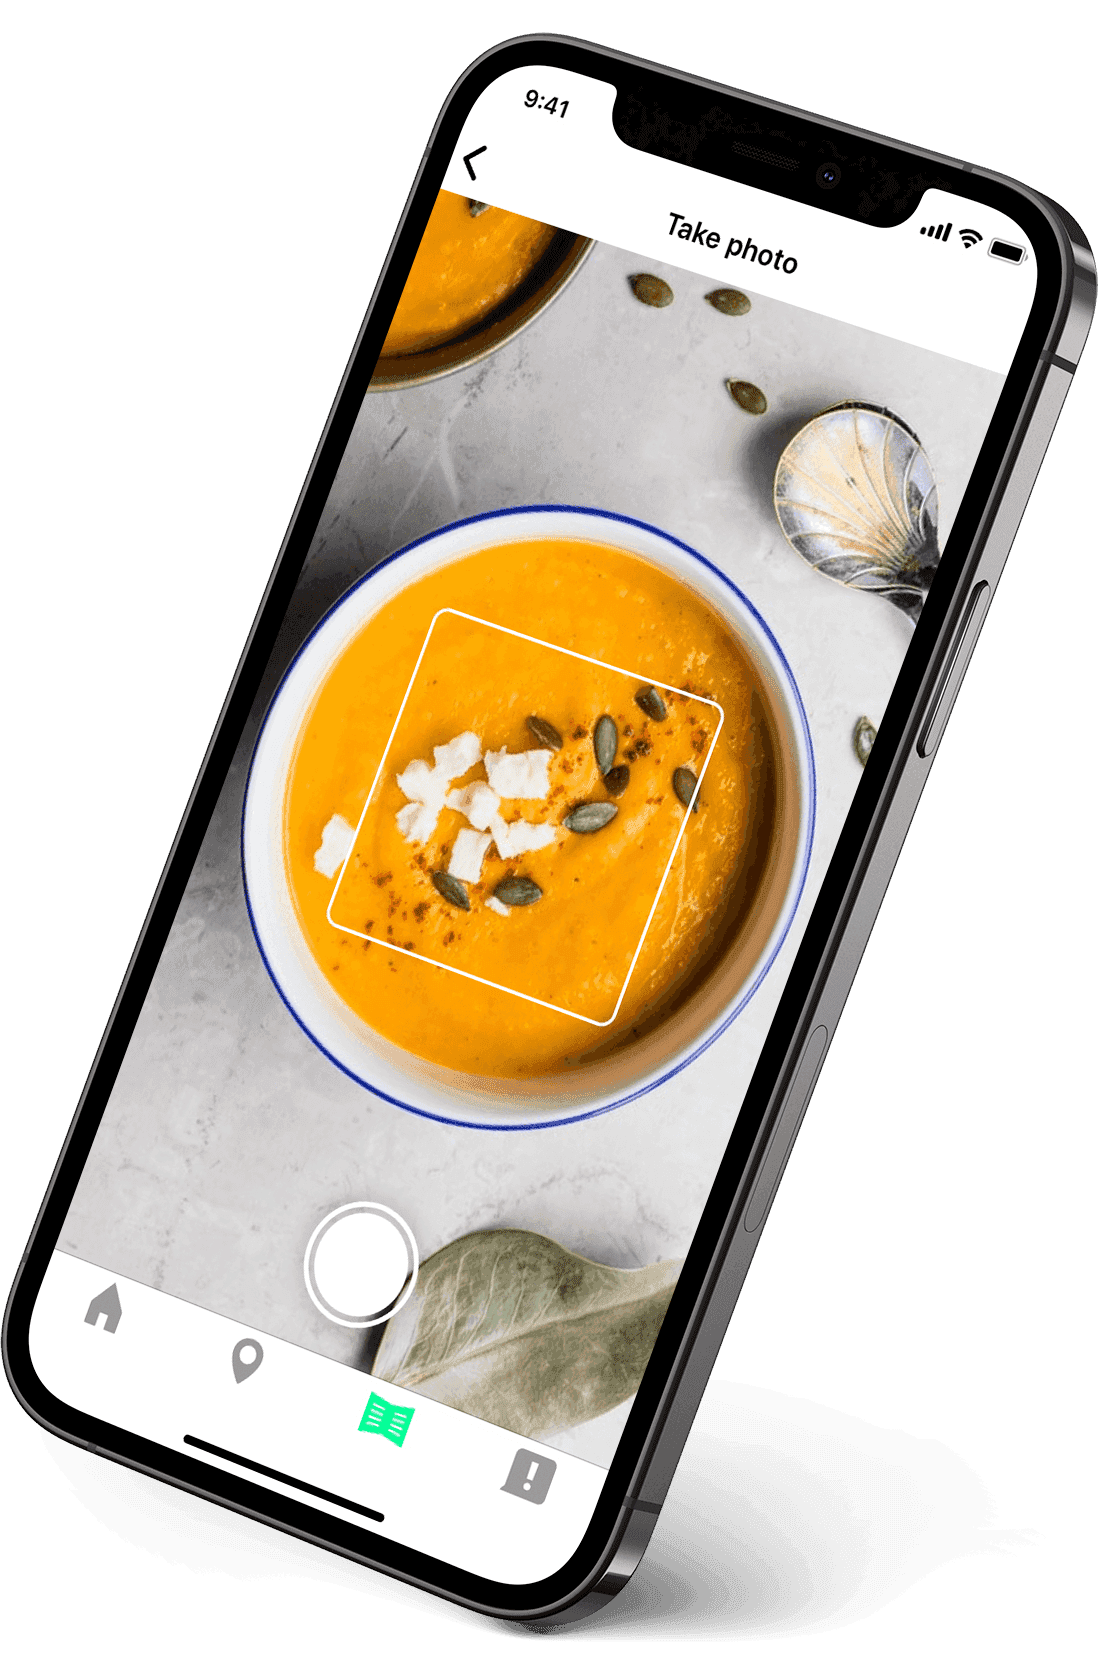 Mobile phone, view of the photo function of the catering app, photo is taken of a soup